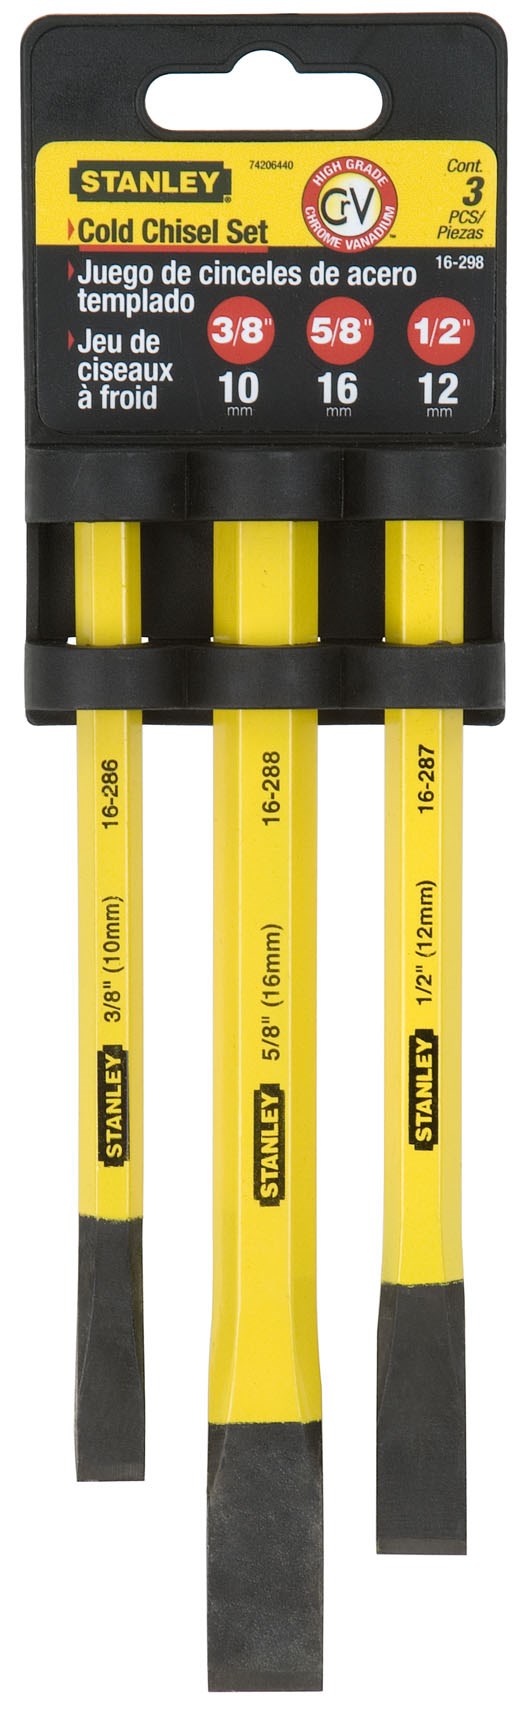 Stanley Hand Tools 16-298 3 Piece Cold Chisel Set